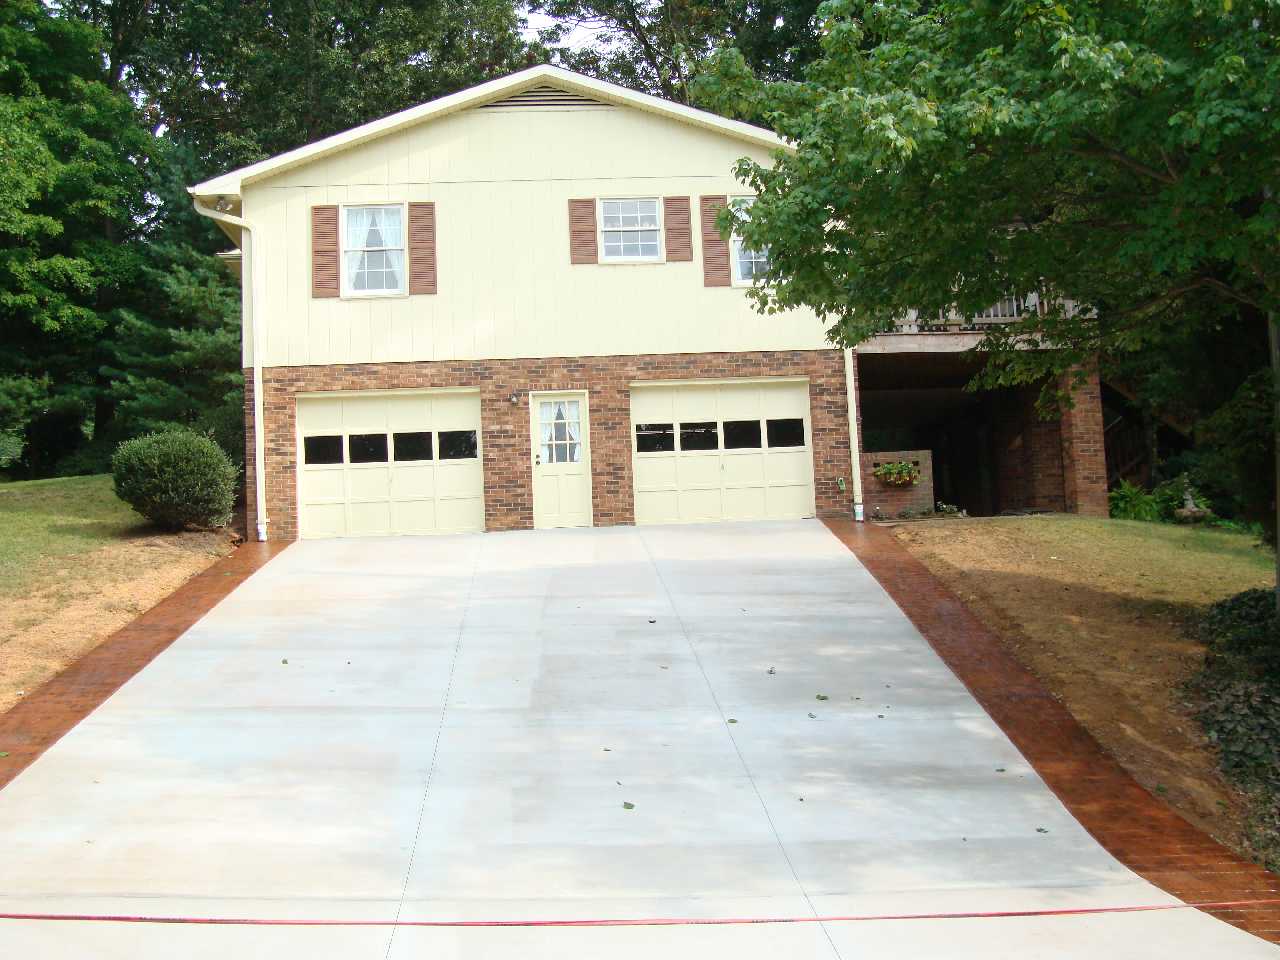 Atlantic Coast Concrete: Driveway Tear Out and Replace ...